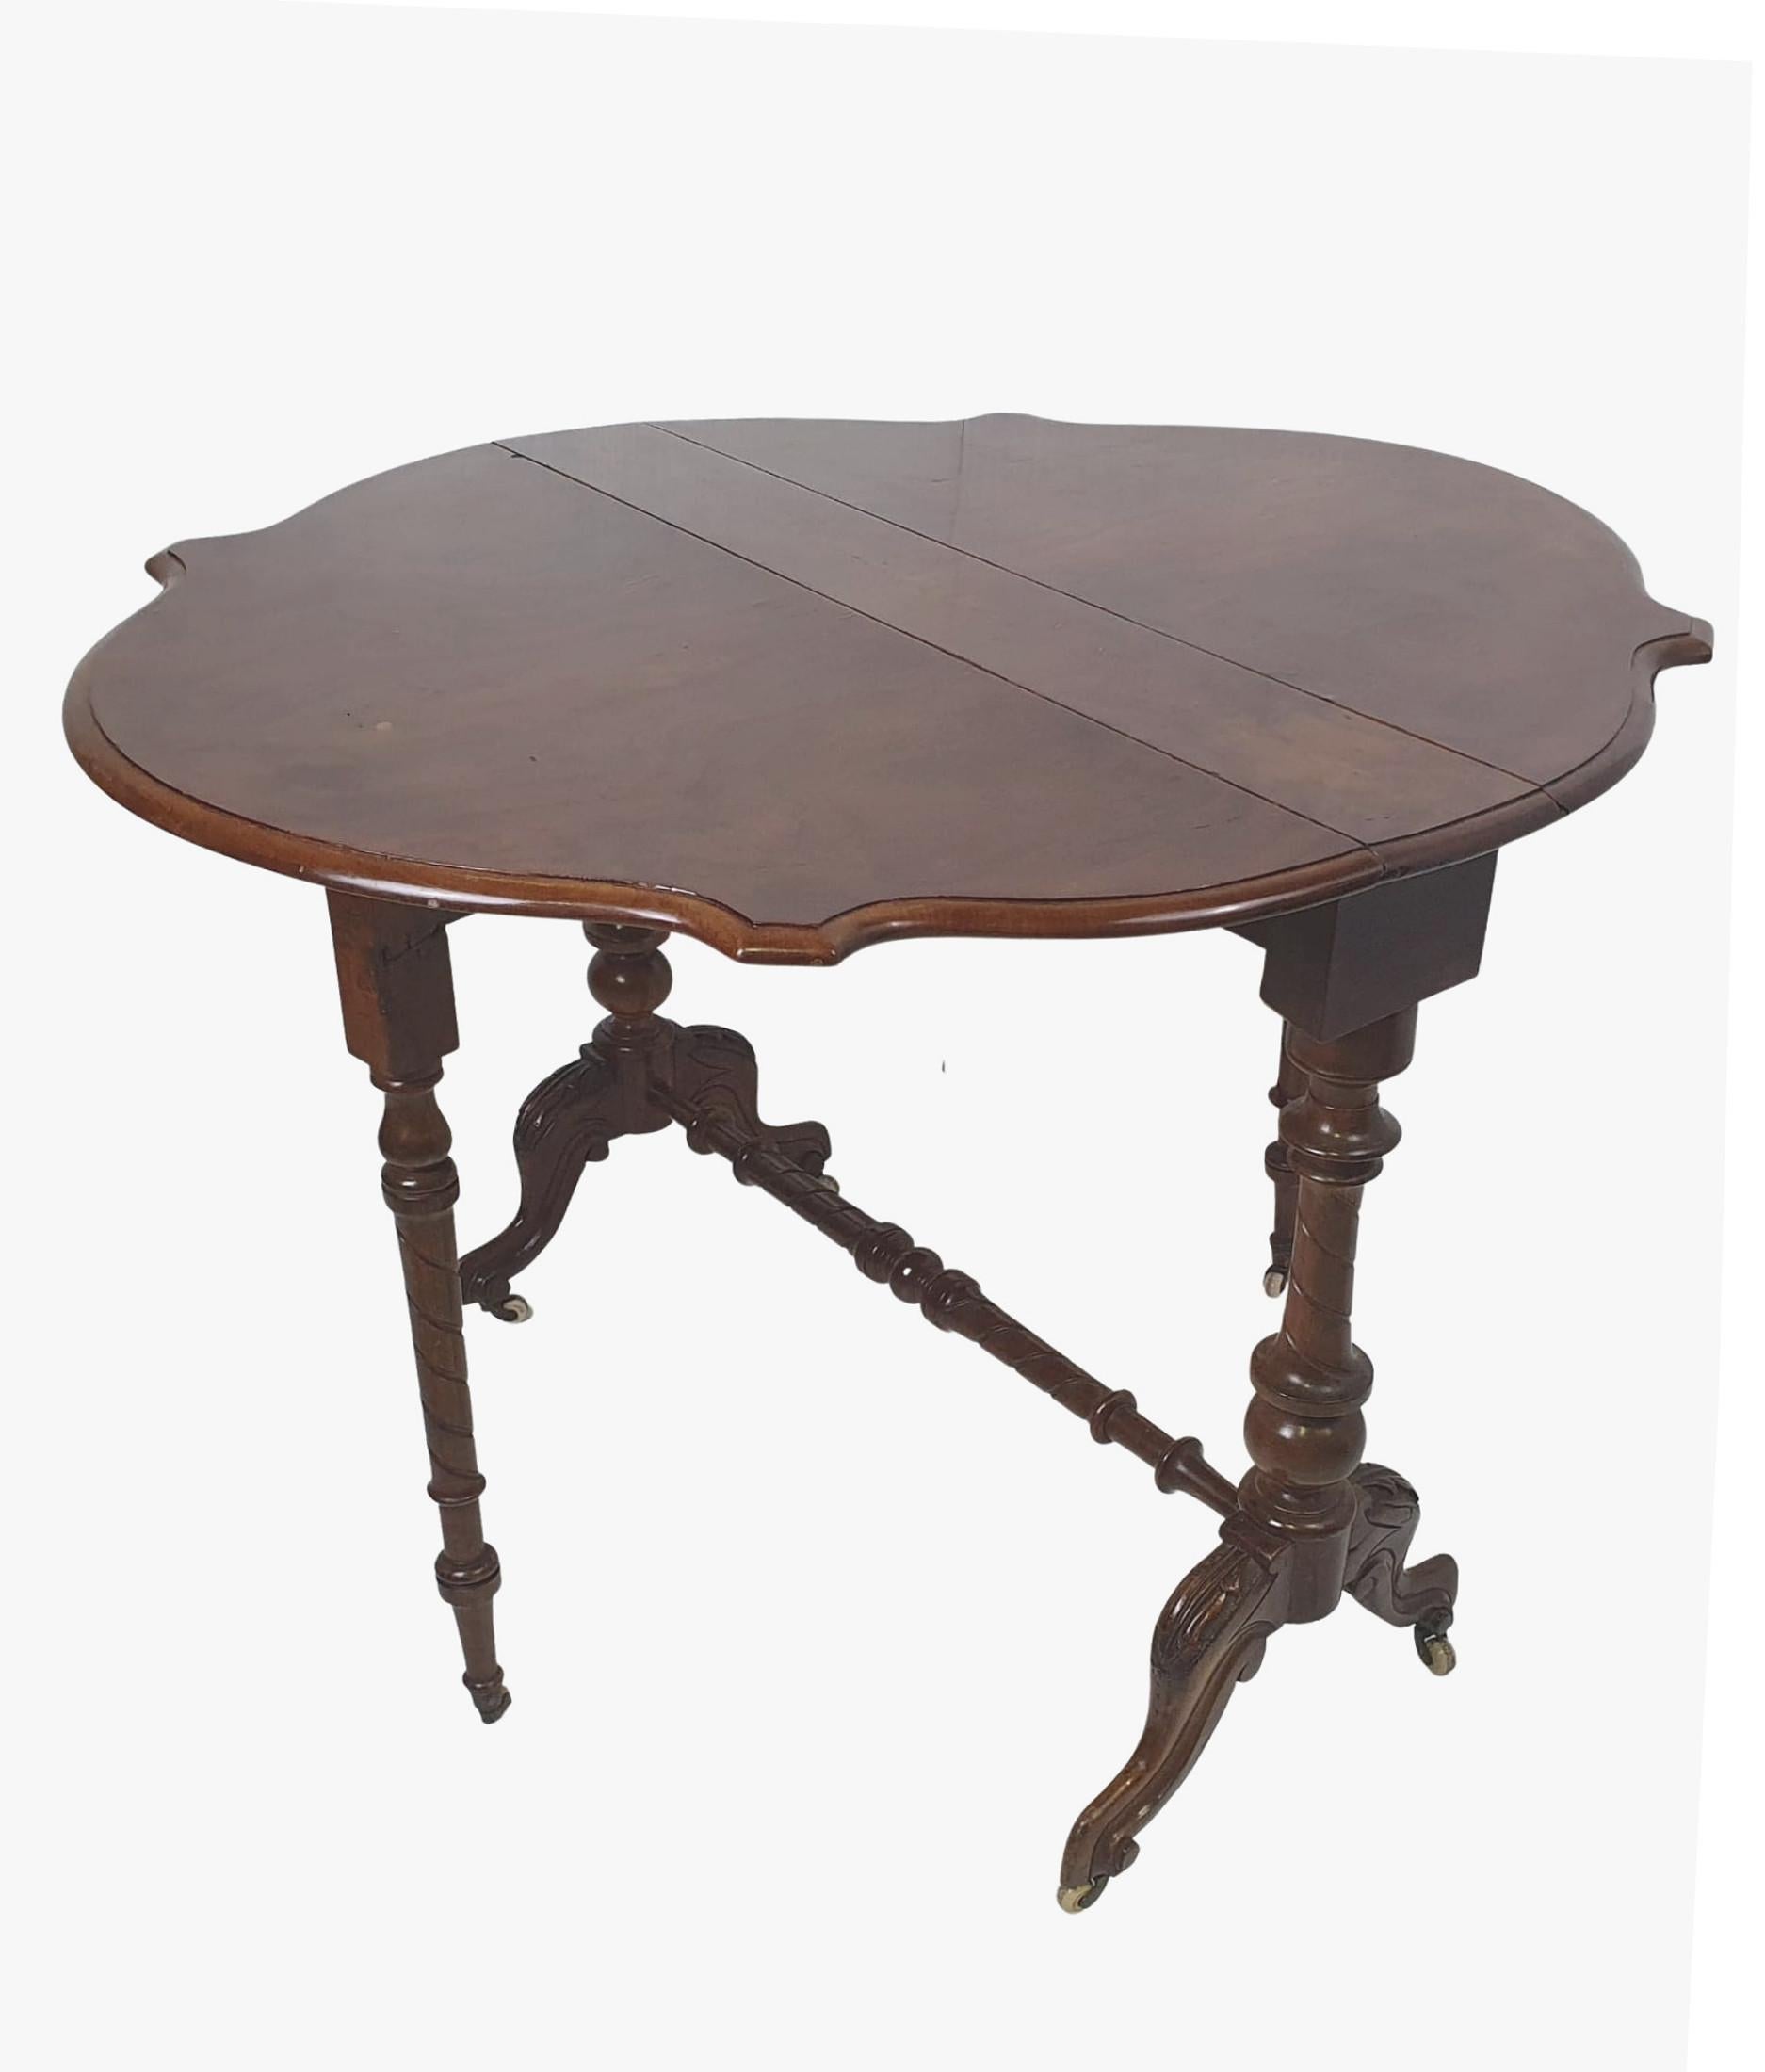 sutherland table for sale